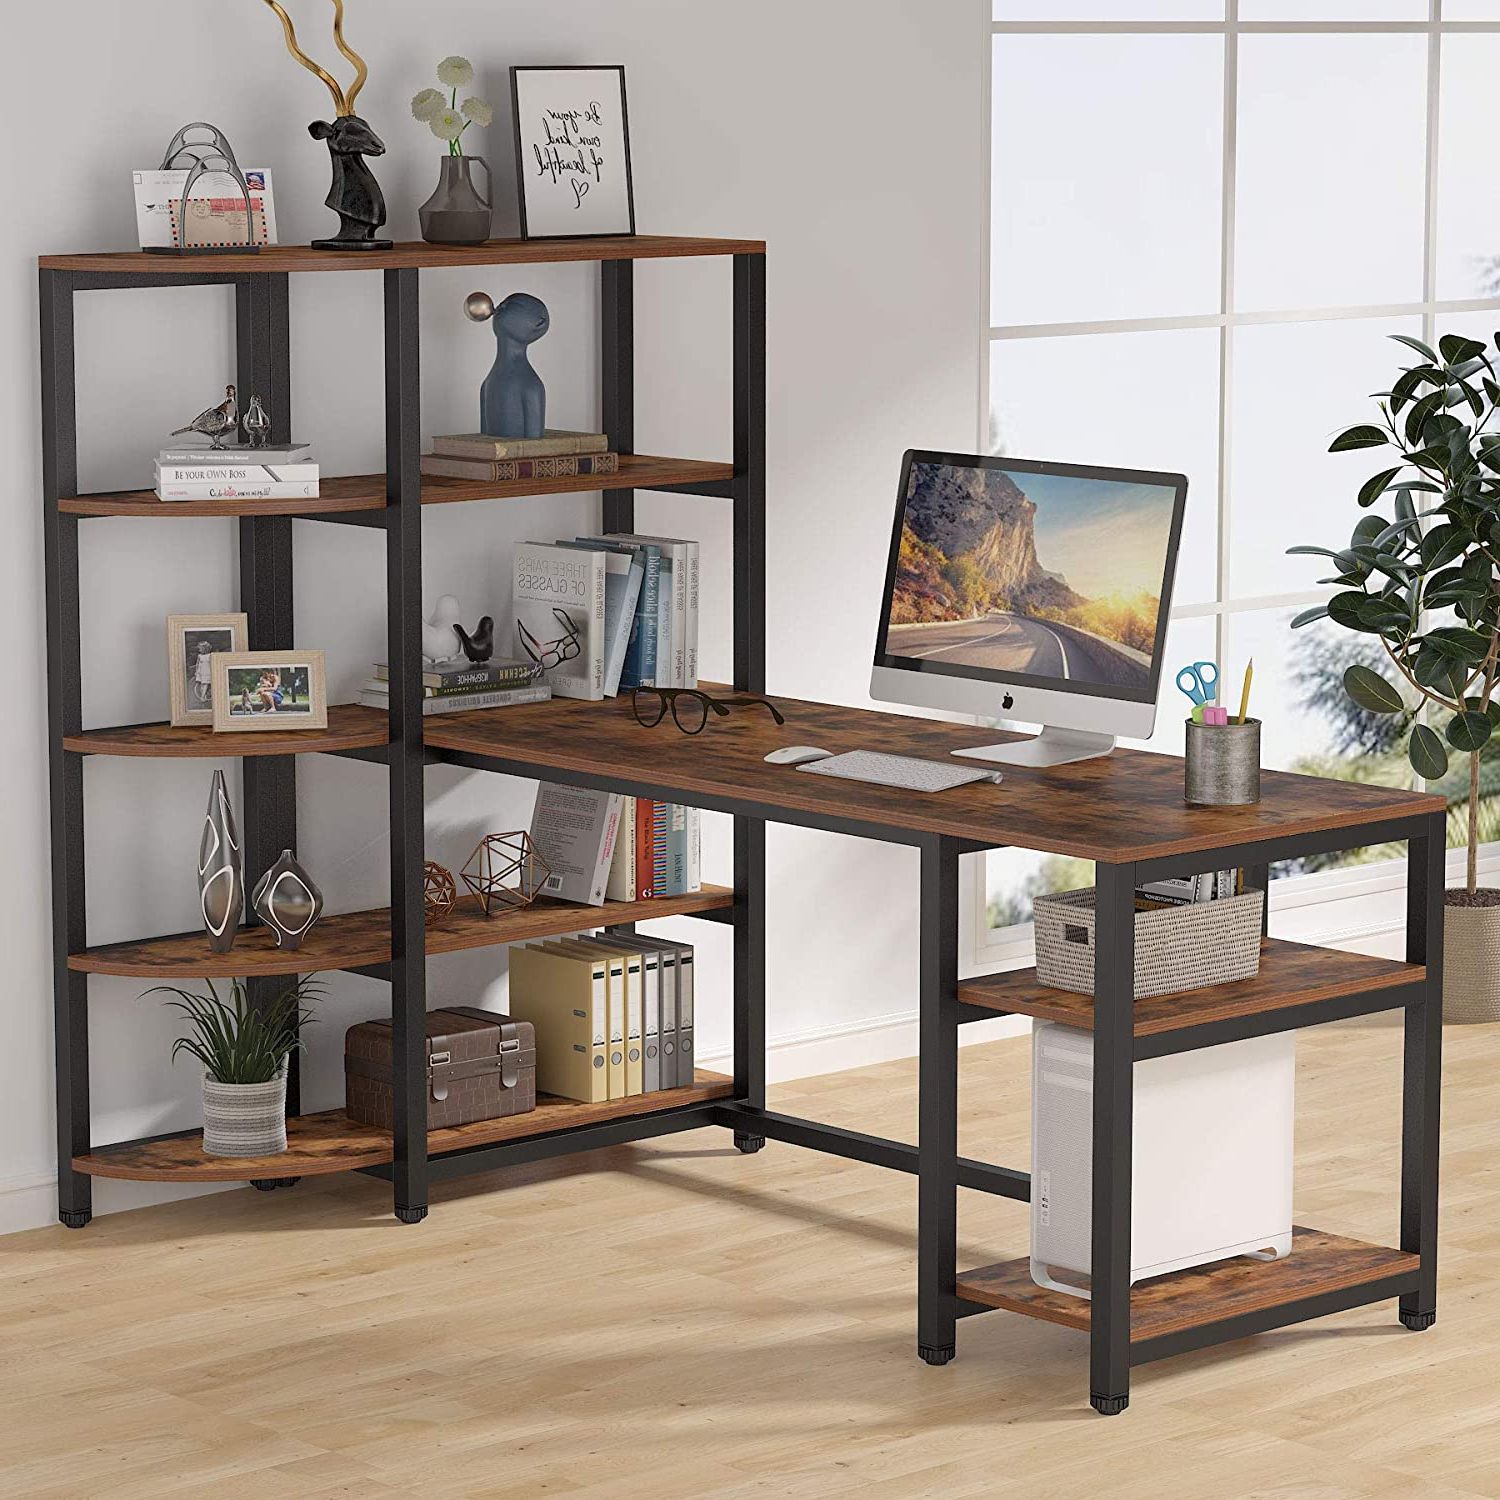 Fashionable Executive Desks With Dual Storage With Industrial Computer Desk With 5 Tier Storage Shelves, 67 Inch Large (View 13 of 15)